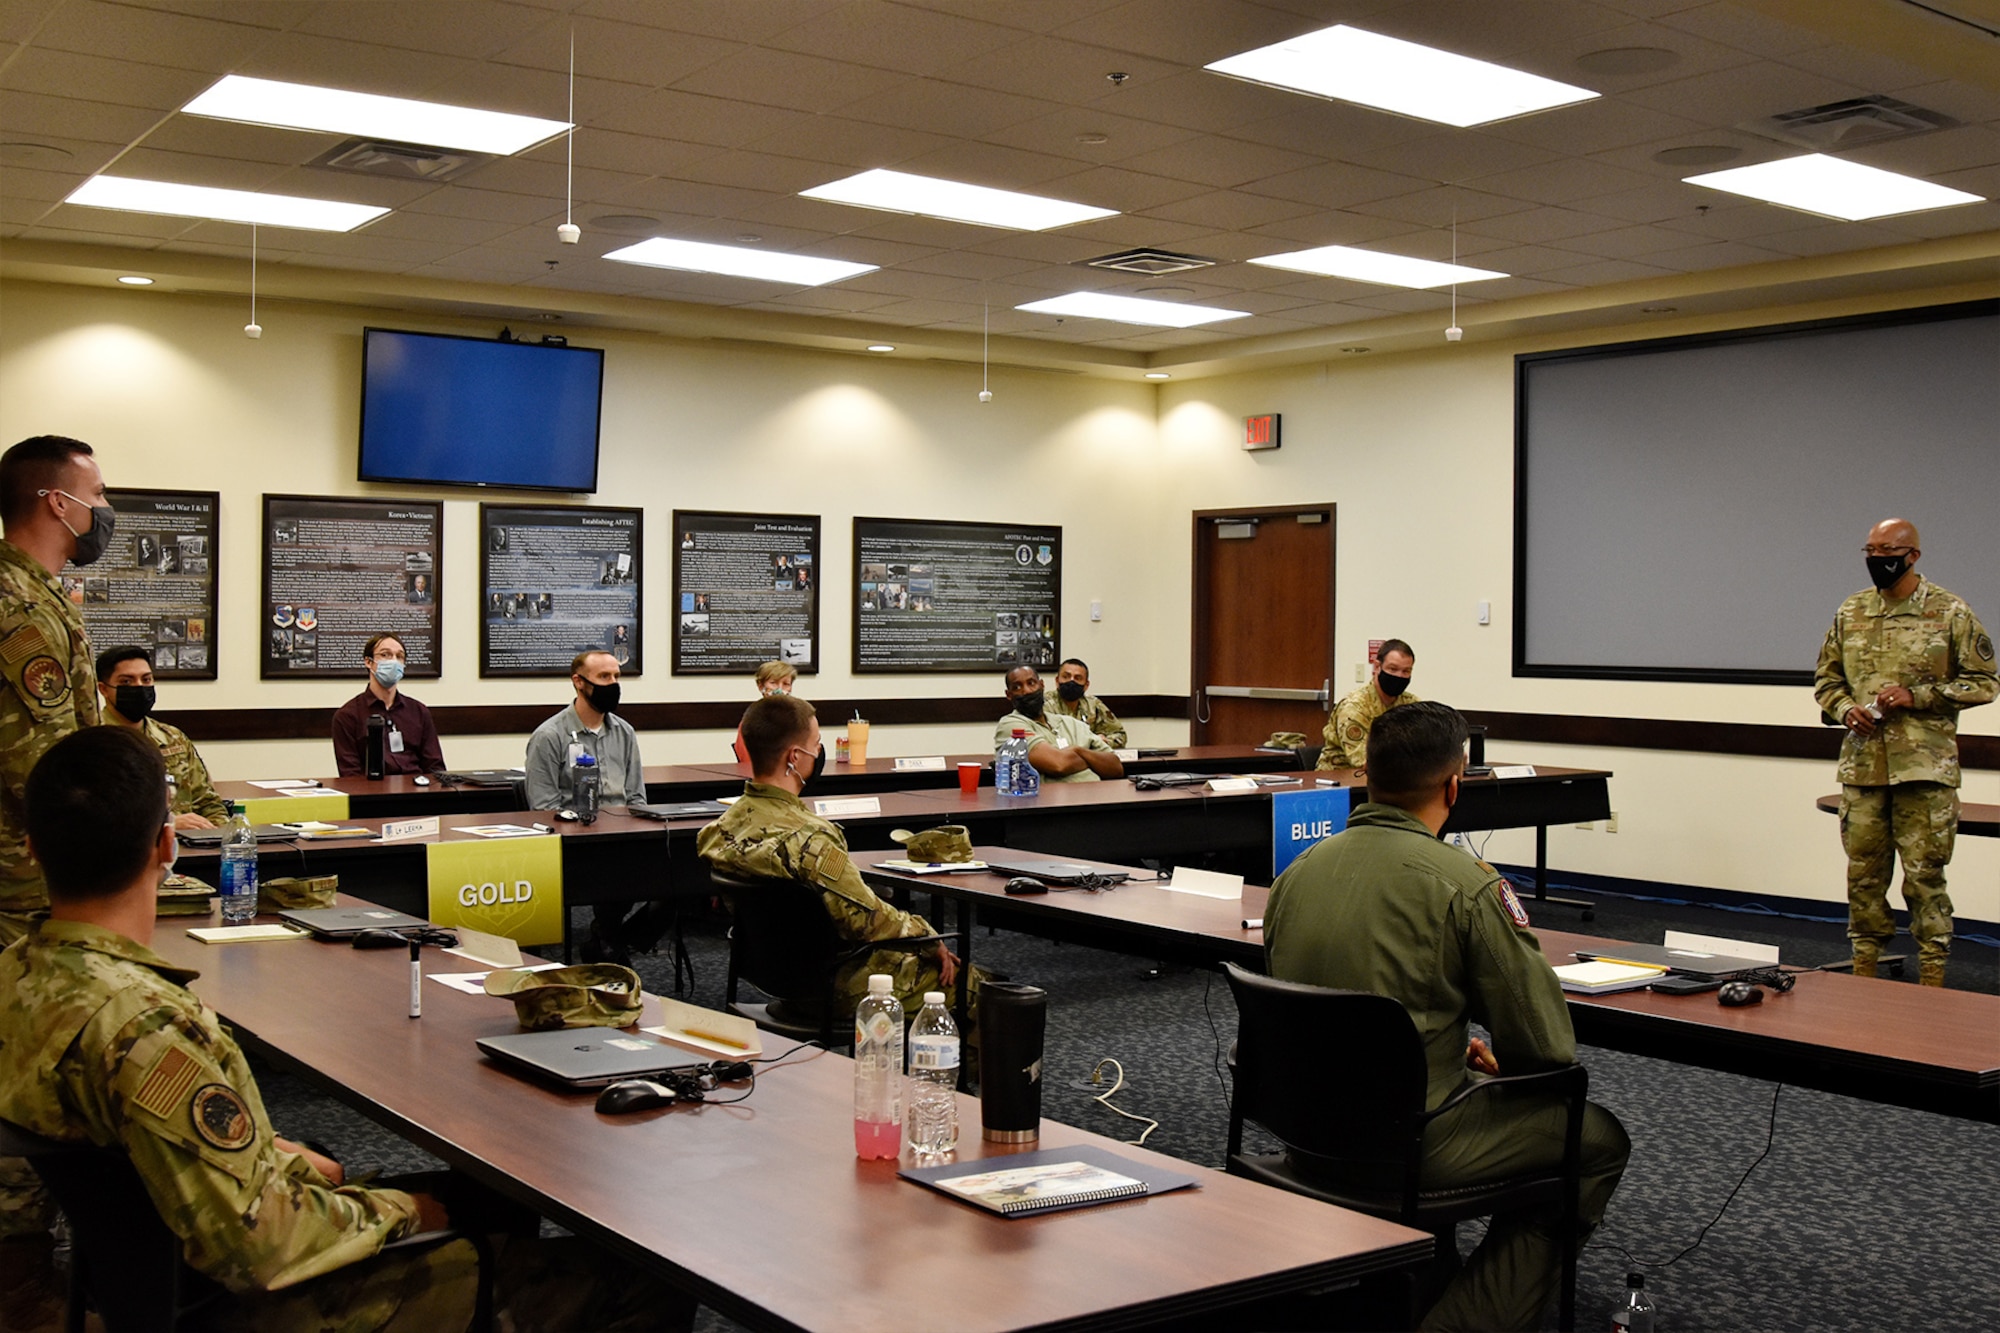 Air Force Chief of Staff Gen. CQ Brown, Jr., addresses AFOTEC 301 operational test course students during his Aug. 12, 2021 visit to the Air Force Operational Test and Evaluation Center. (U.S. Air Force photo by Andrew Jogi)